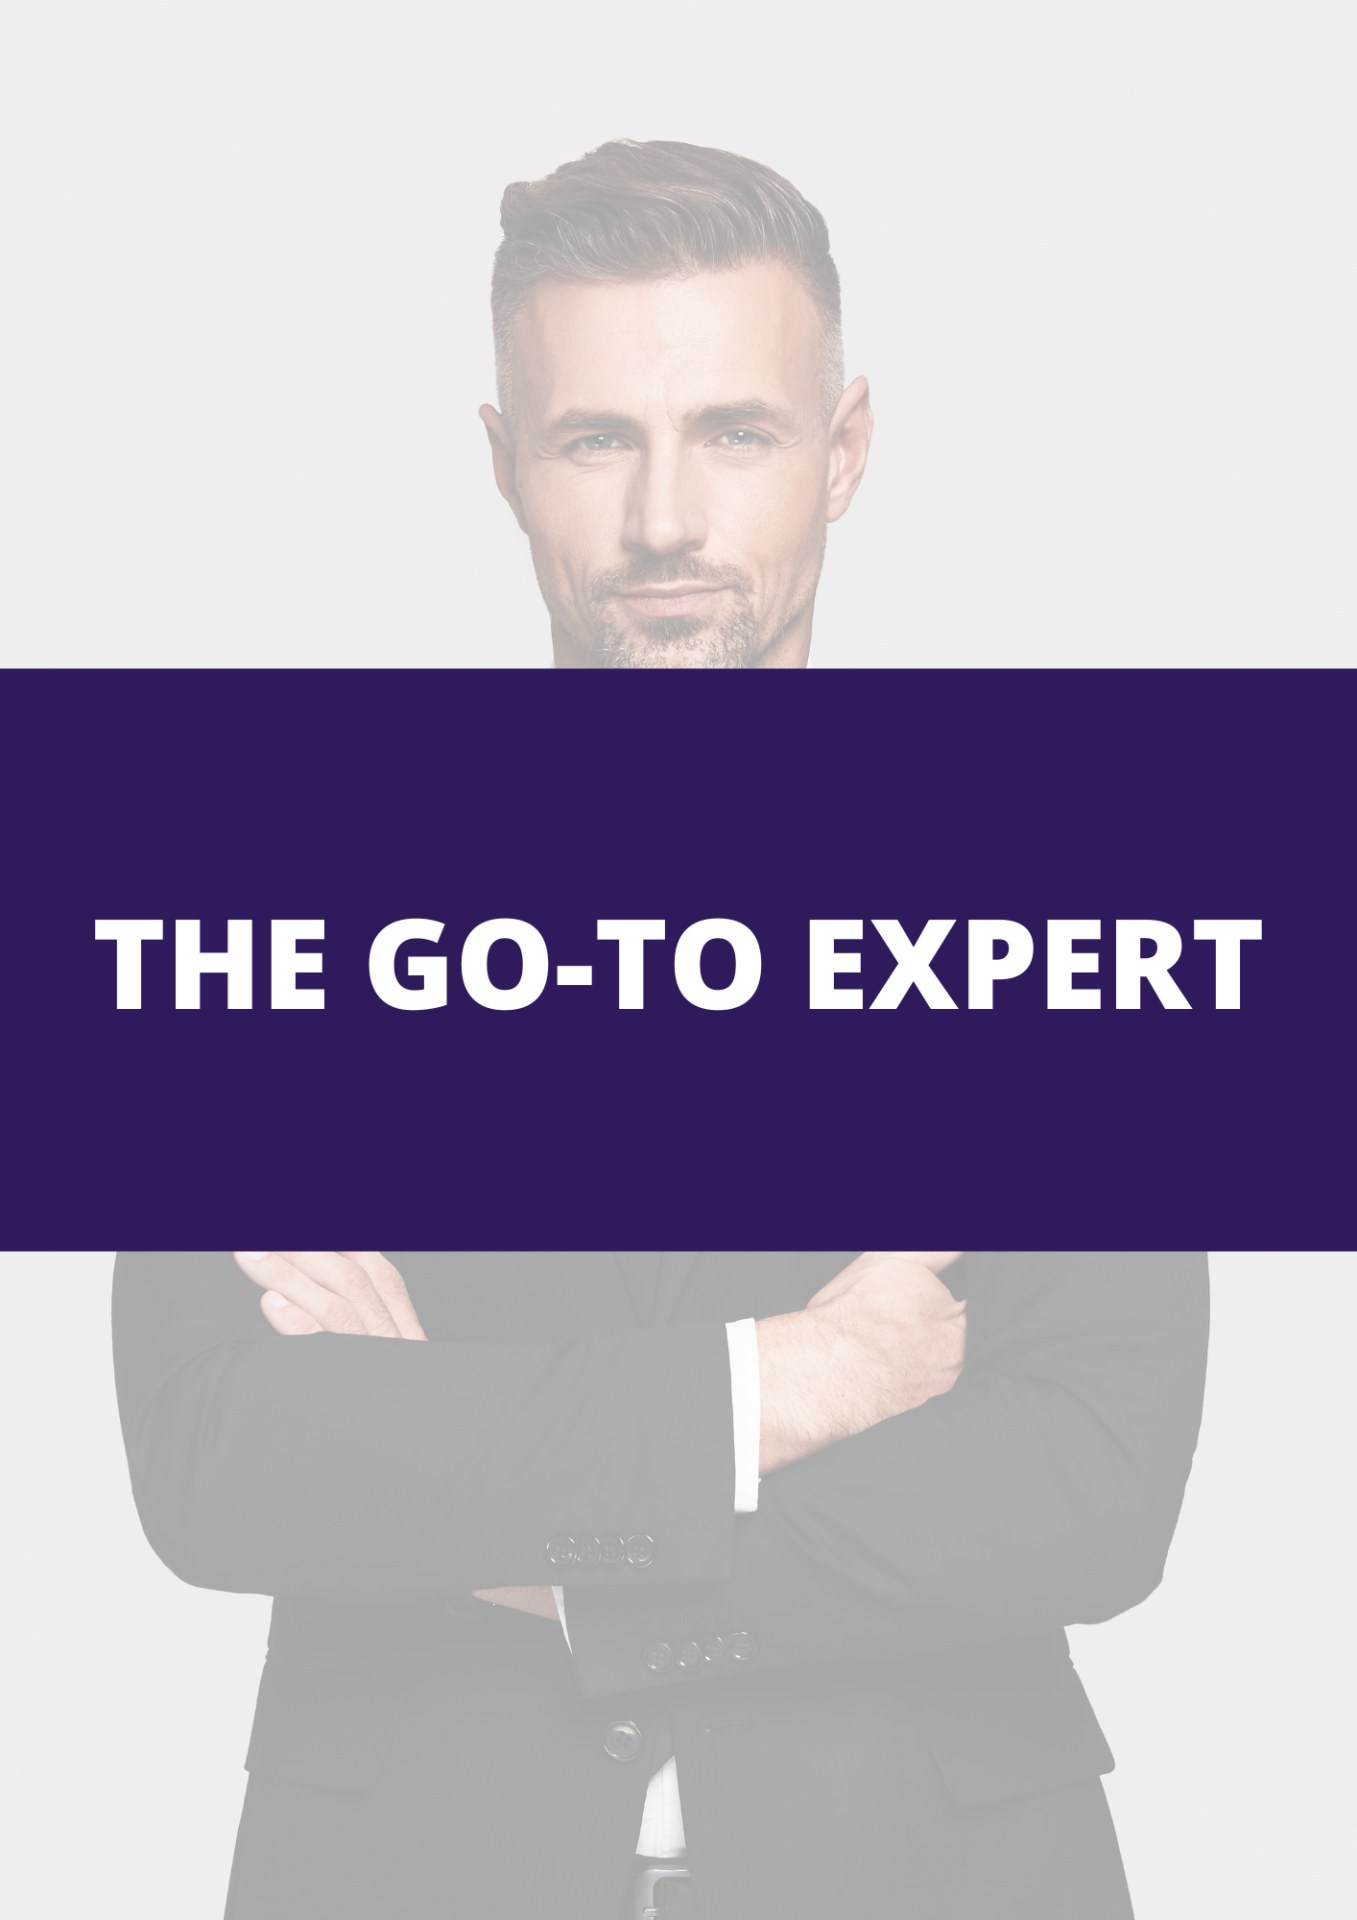 Go to expert